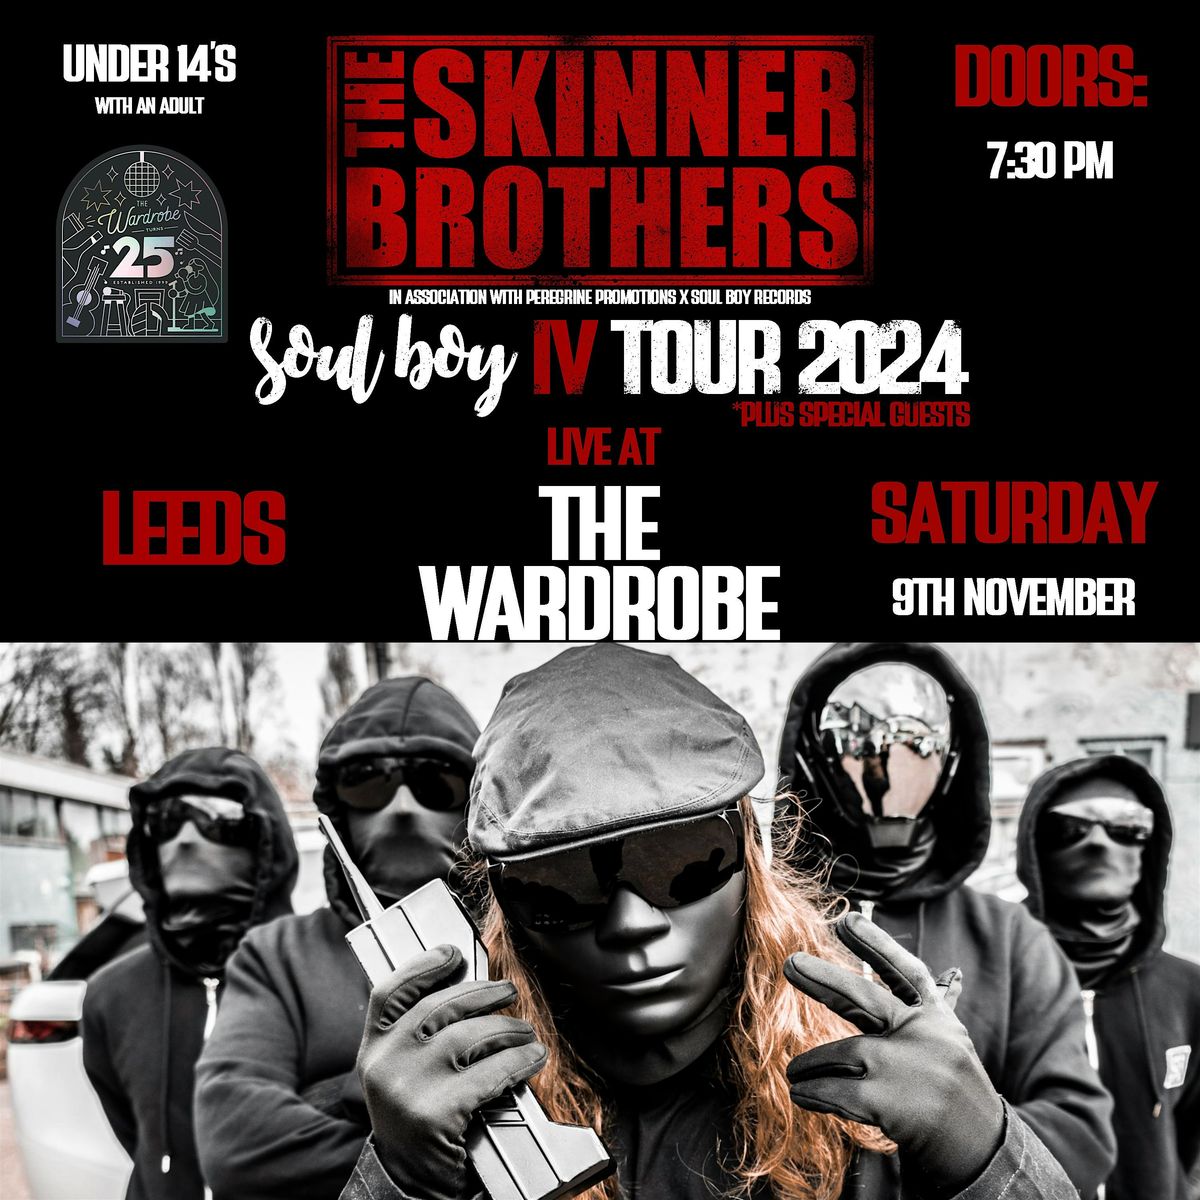 The Skinner Brothers live @ Leeds Wardrobe